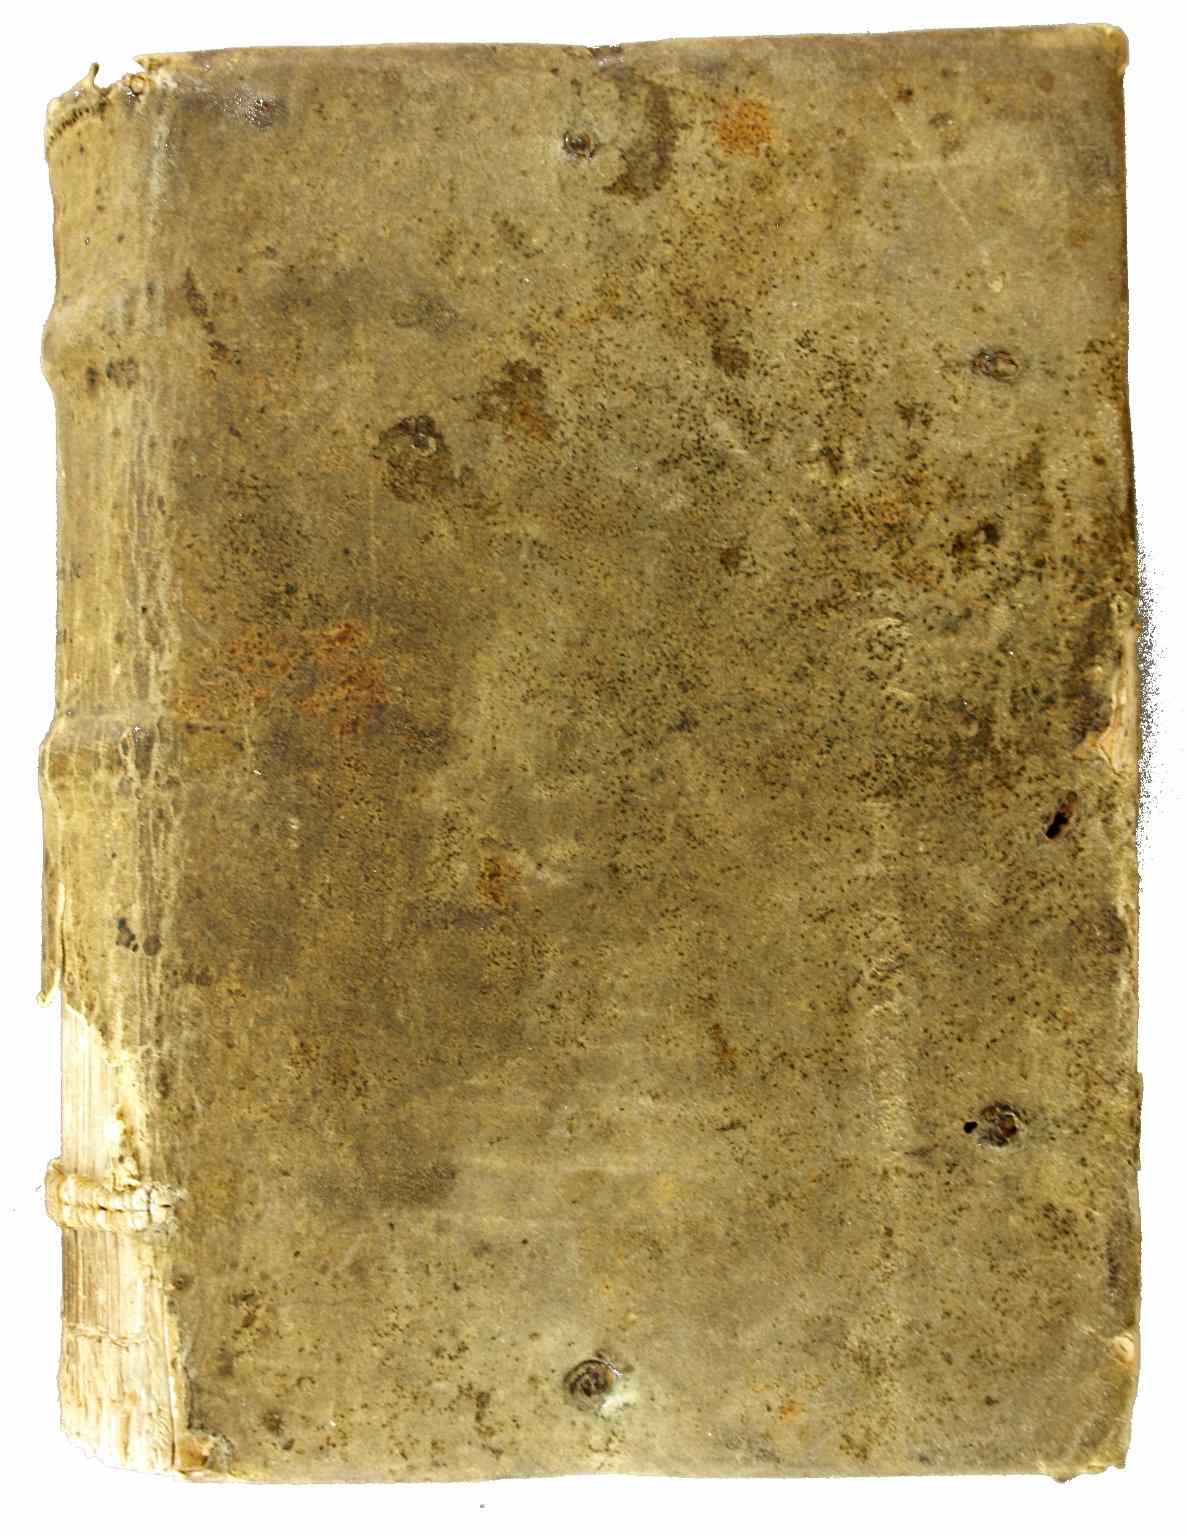 Fifteenth-century alum-tawed cover. Folger INC L140. Used by permission of the Folger Shakespeare Library.